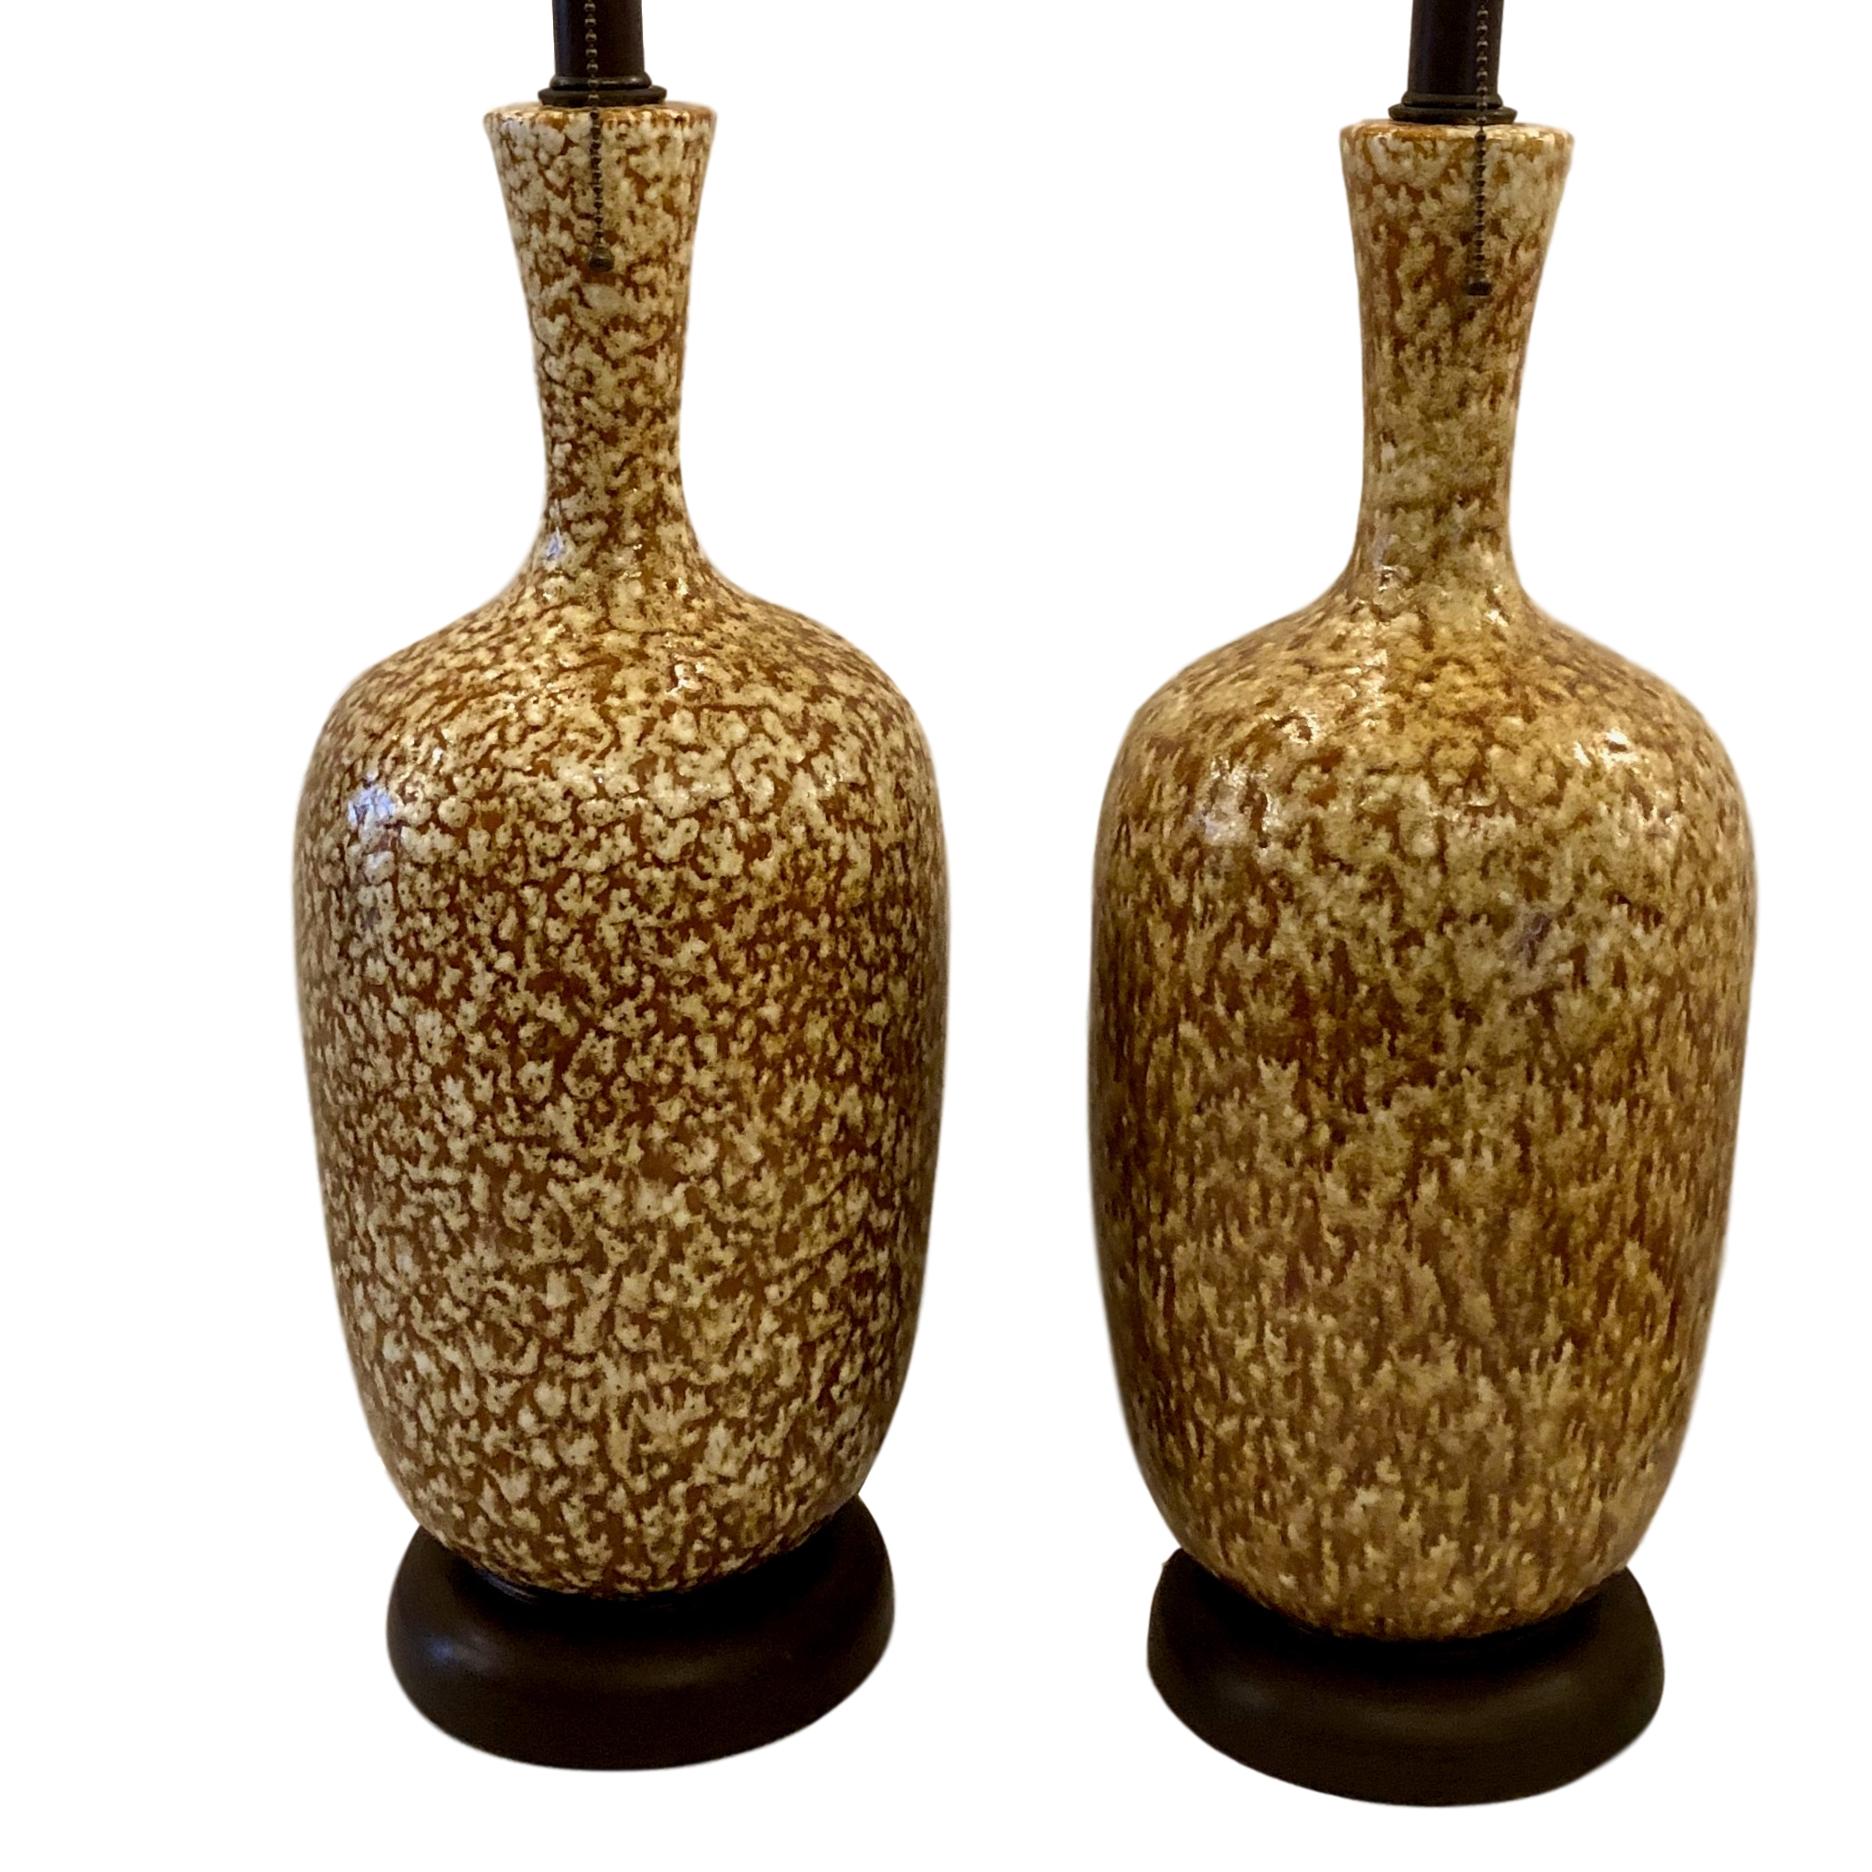 Pair of circa 1950's Italian glazed ceramic table lamps with wooden bases.

Measurements:
Height of body 18